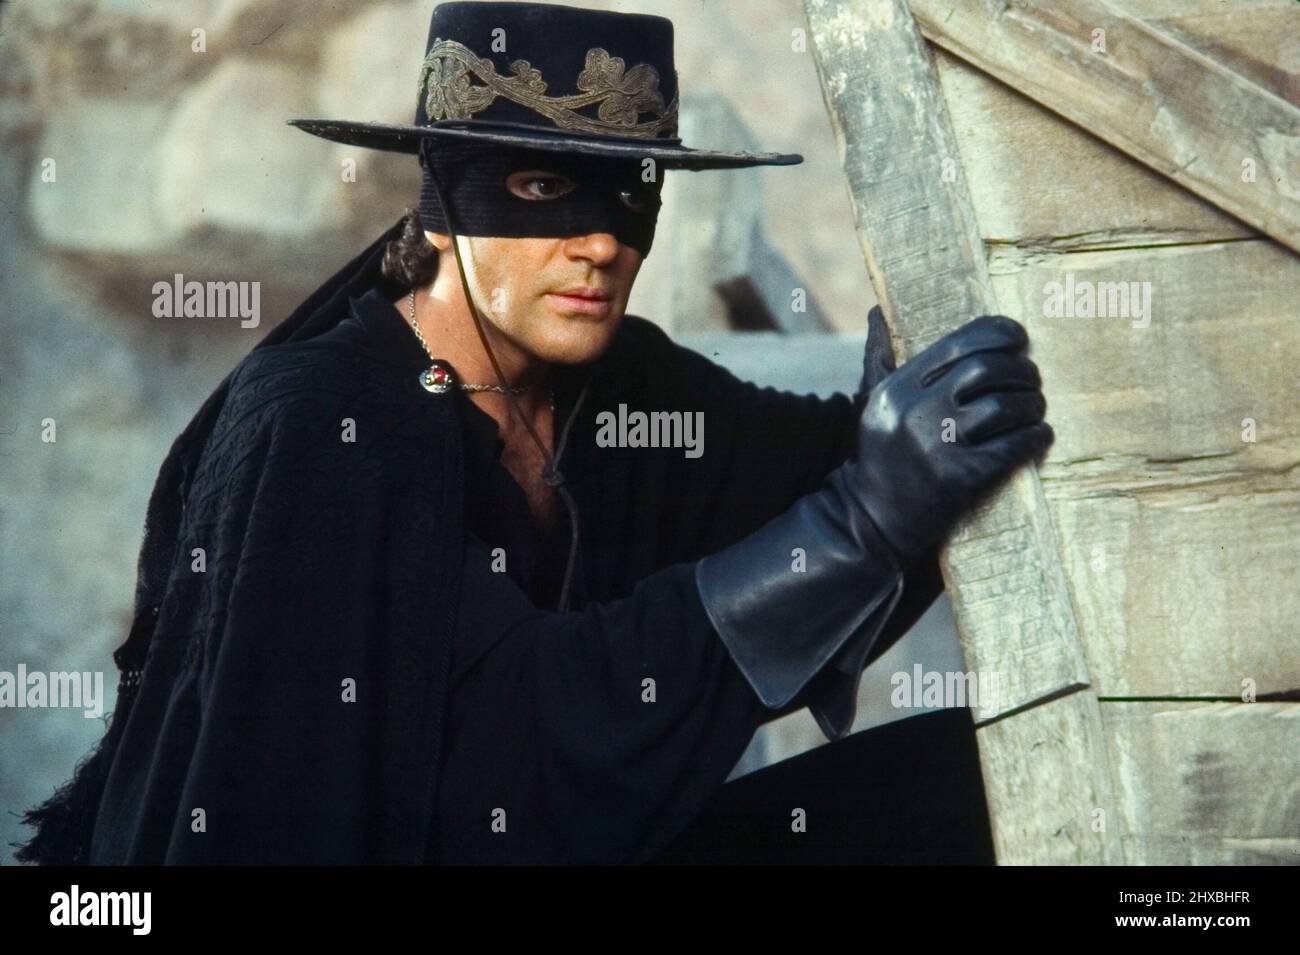 ANTONIO BANDERAS in THE MASK OF ZORRO (1998), directed by MARTIN CAMPBELL. Credit: AMBLIN ENTERTAINMENT / Album Stock Photo